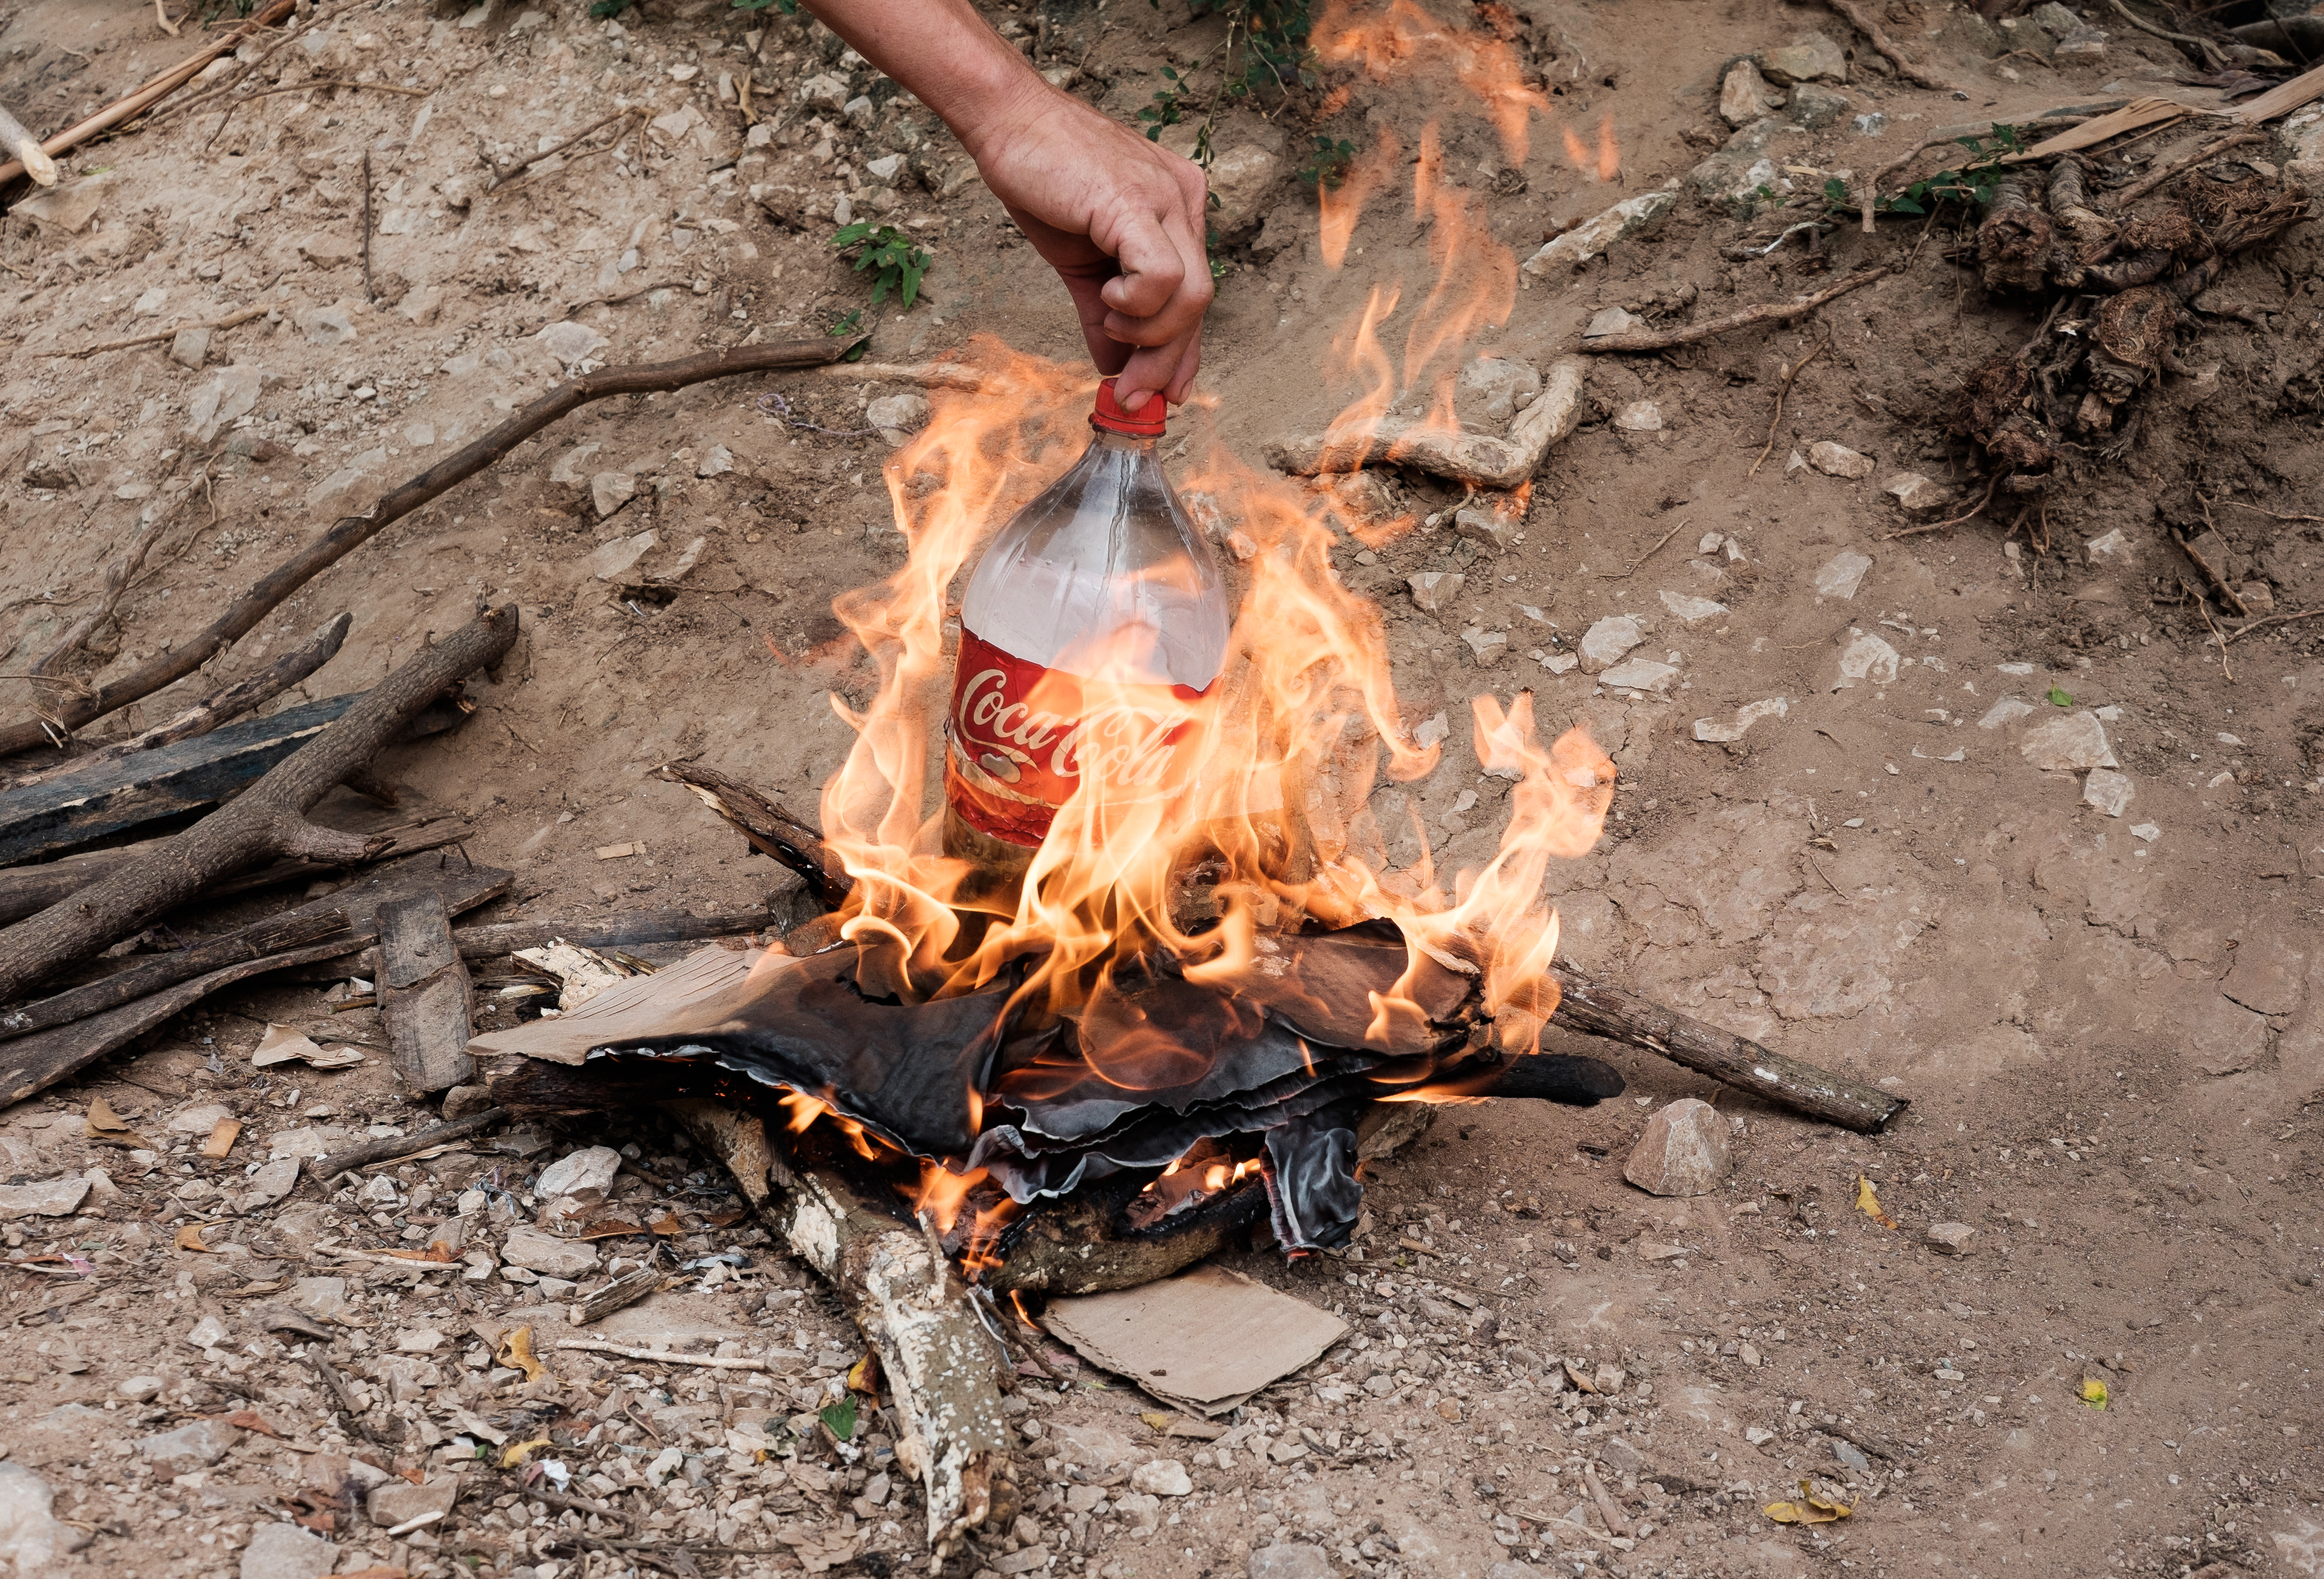 Outside the migrant shelter, a Central American migrant boils water in a Coke bottle for his morning coffee. He carefully adjusts the bottle lid to prevent the water from boiling over or the plastic from burning. Bringing few objects with them on their journey, migrants rely on creative uses of found and recycled items in order to fulfill basic needs.